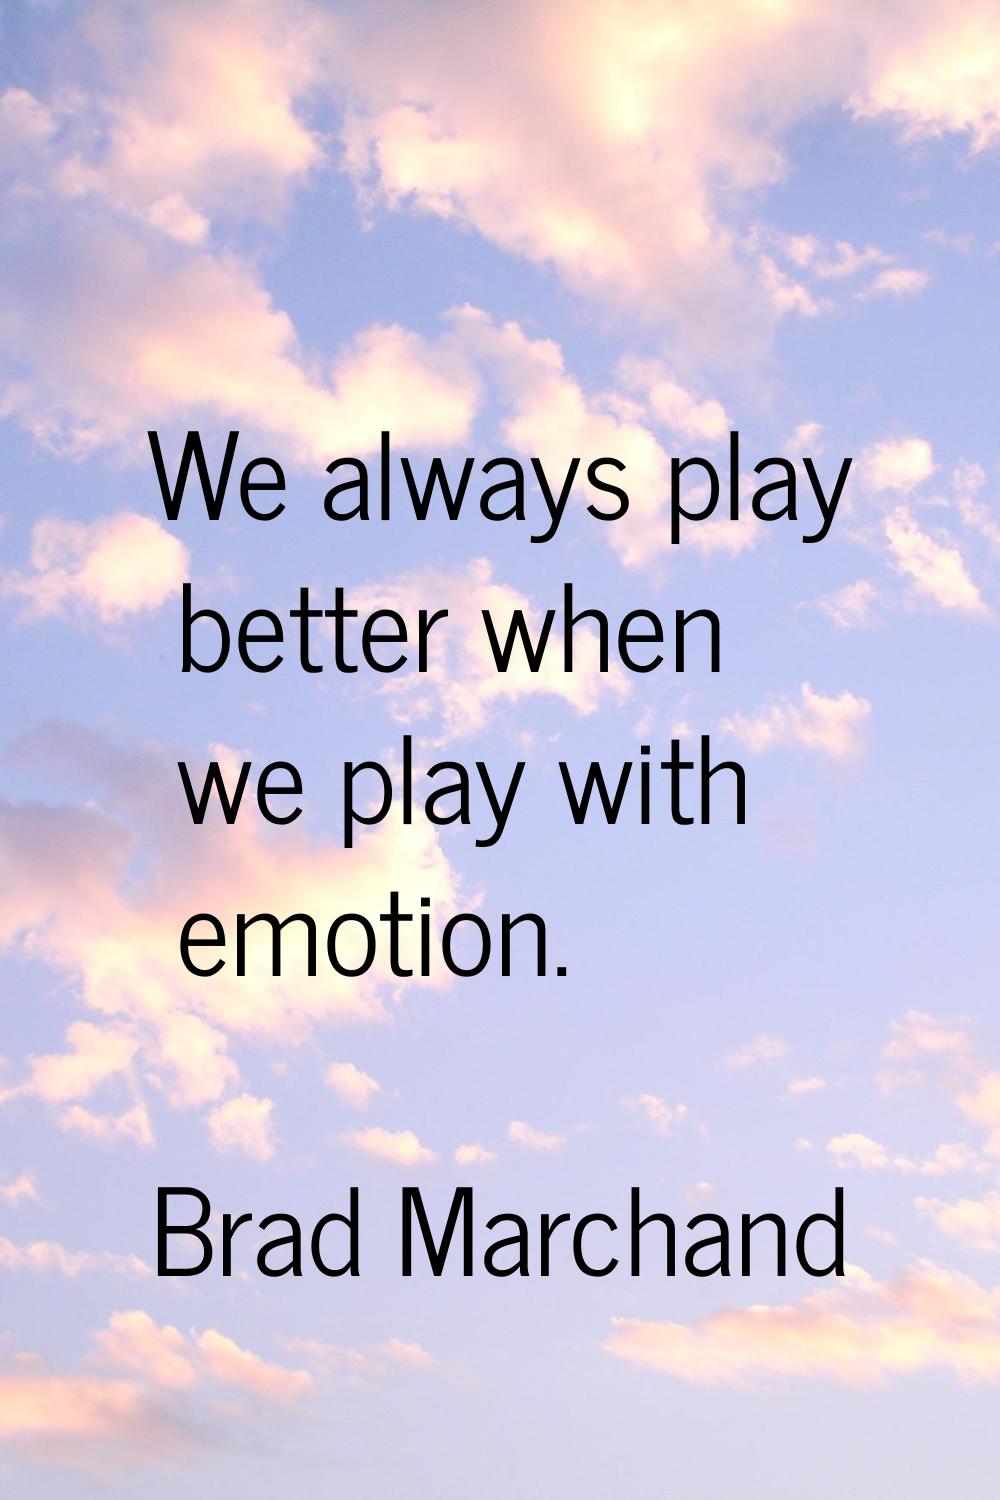 We always play better when we play with emotion.